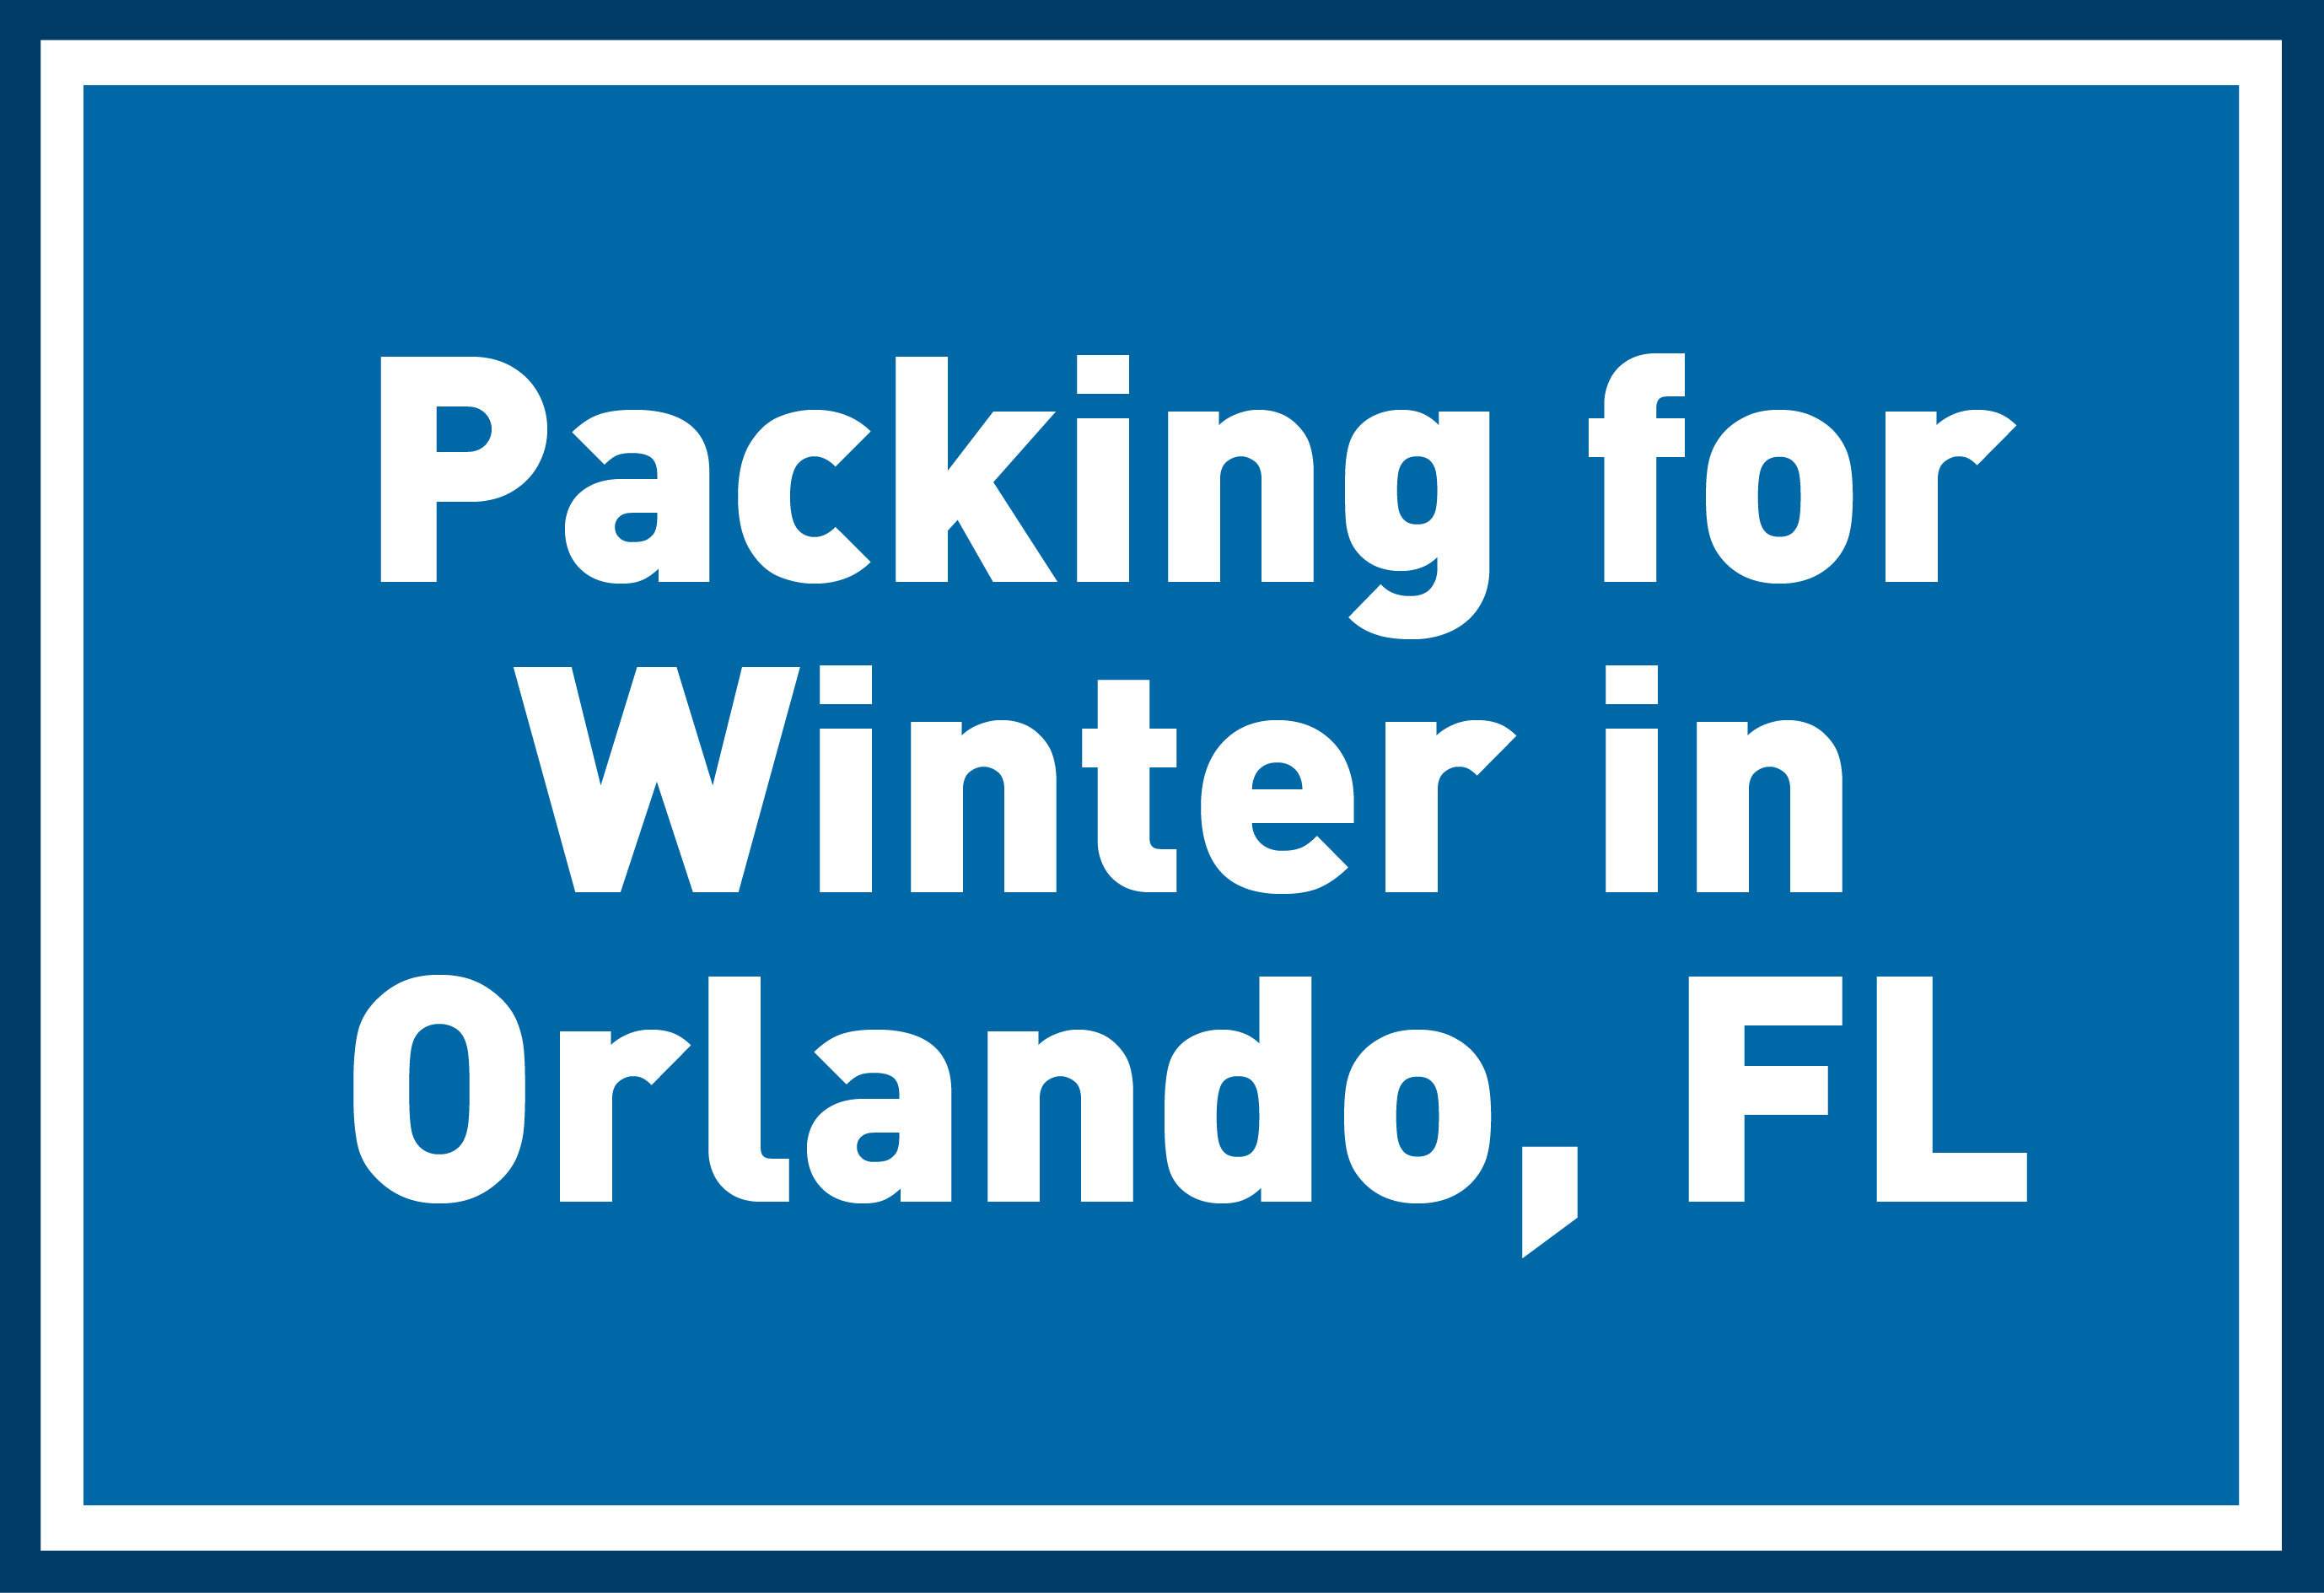 Packing for winter in Orlando, FL